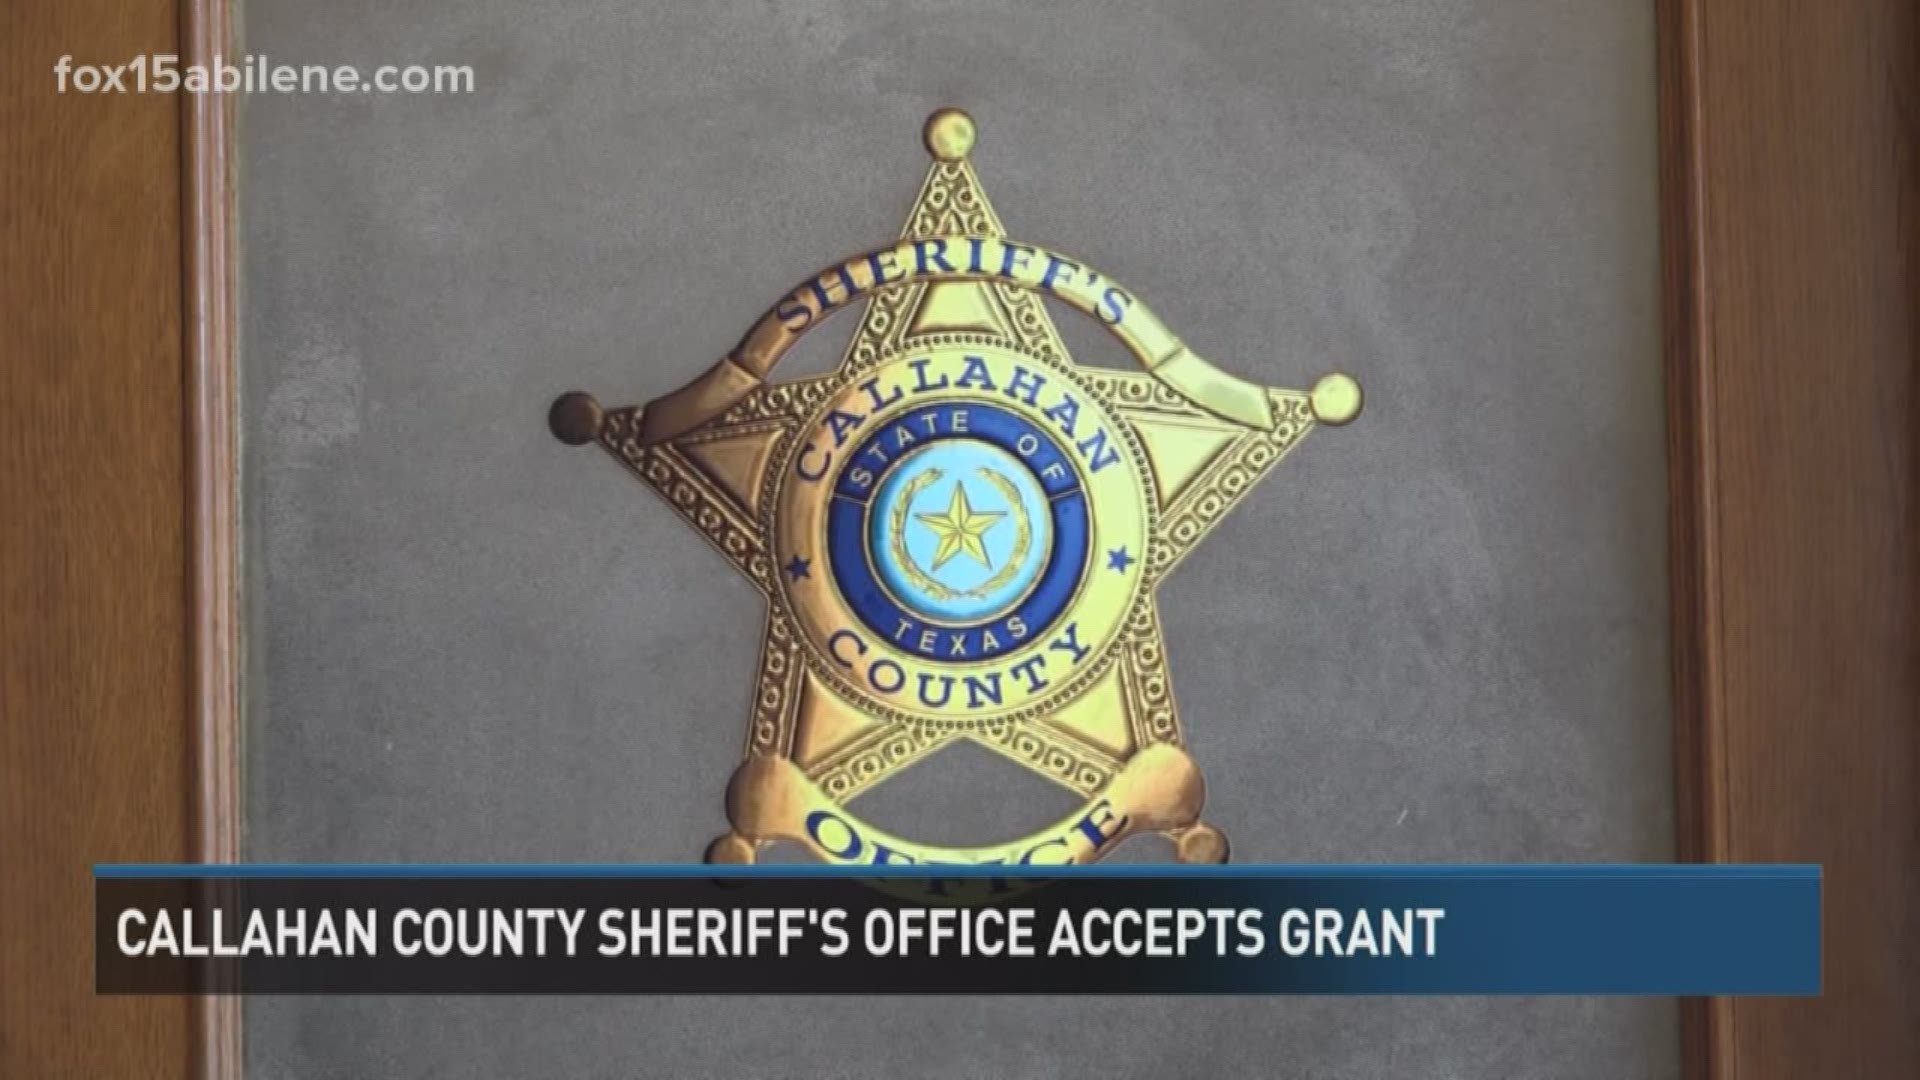 Callahan county sheriff's office receives grant.